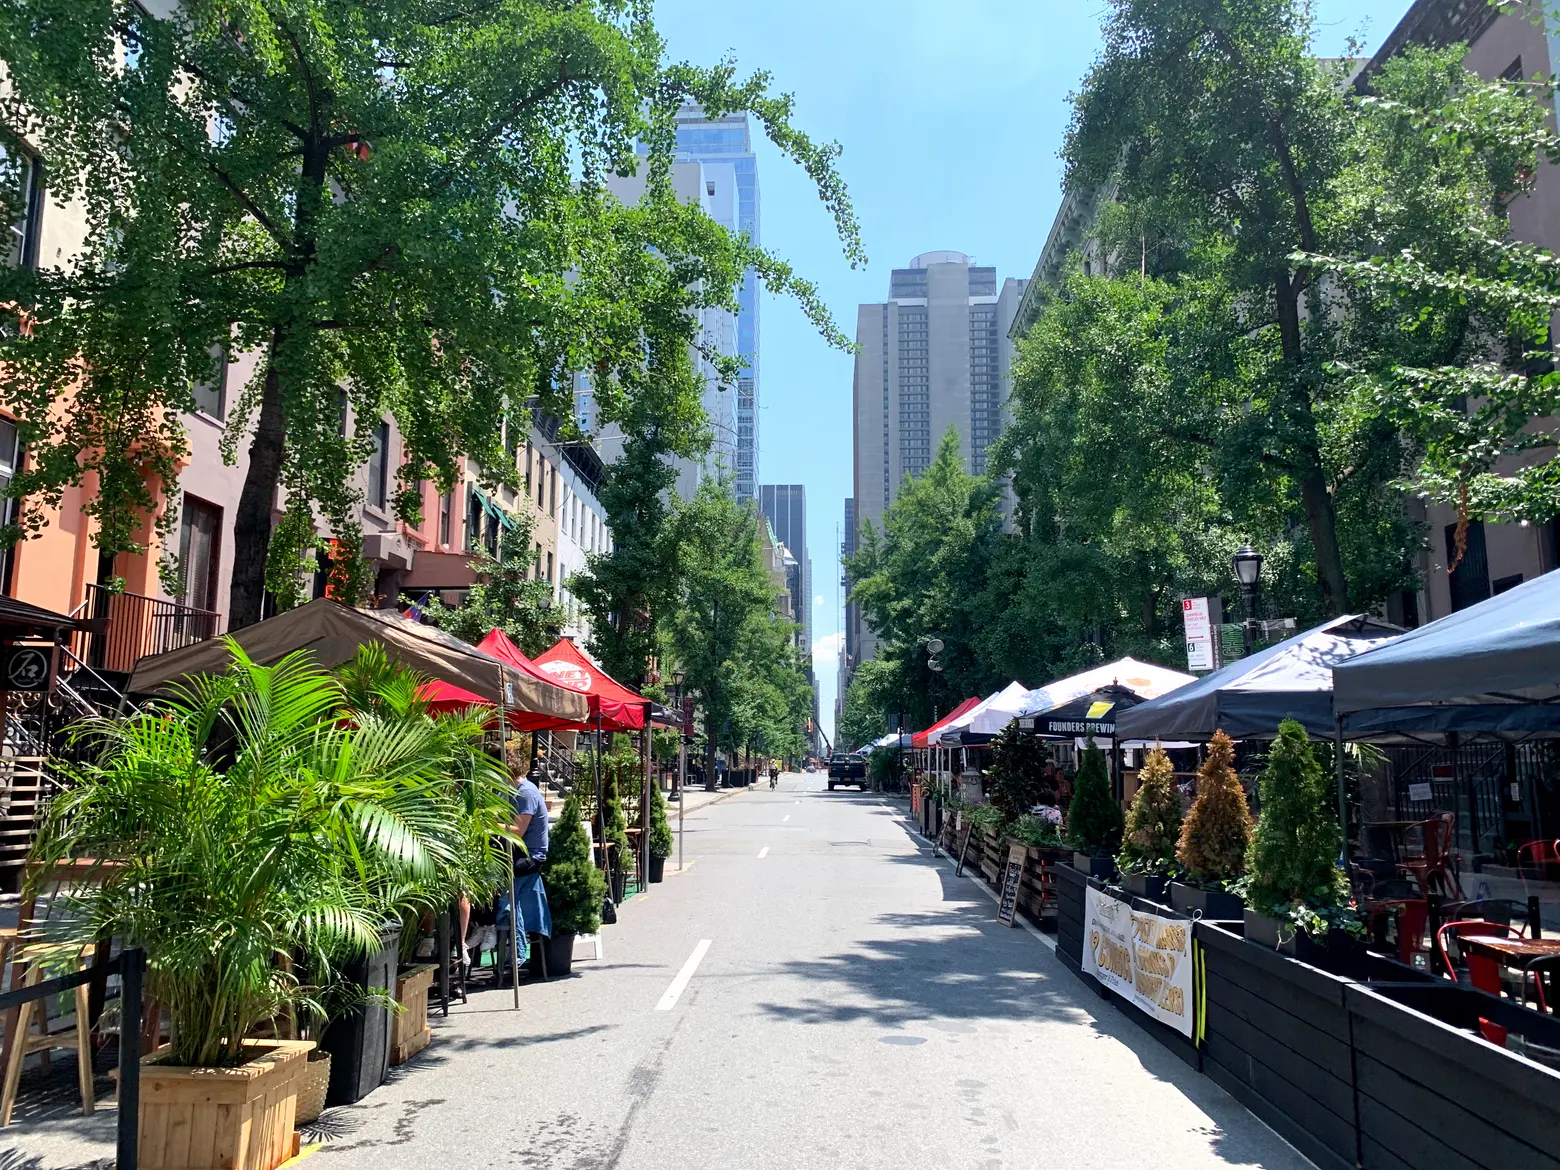 NYC’s latest set of outdoor dining open streets includes 13 blocks on the Upper West Side